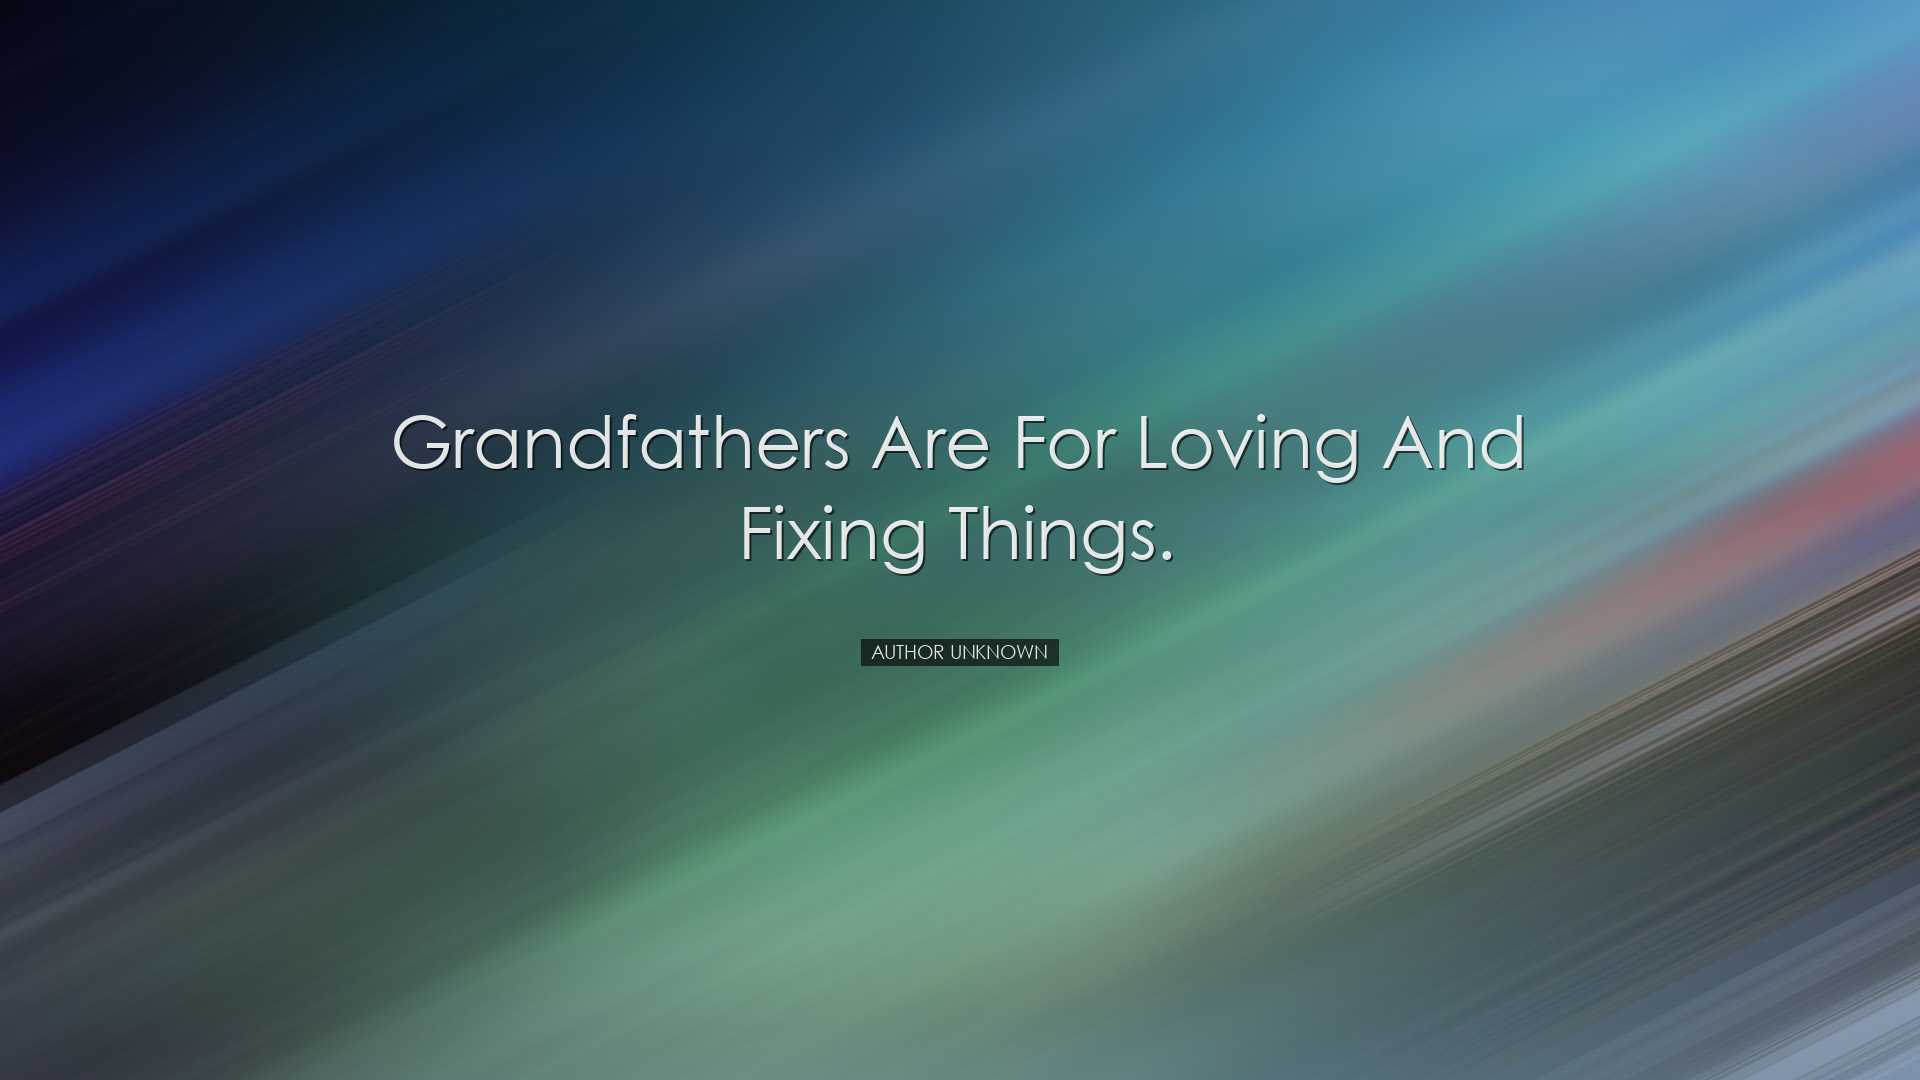 Grandfathers are for loving and fixing things. - Author Unknown